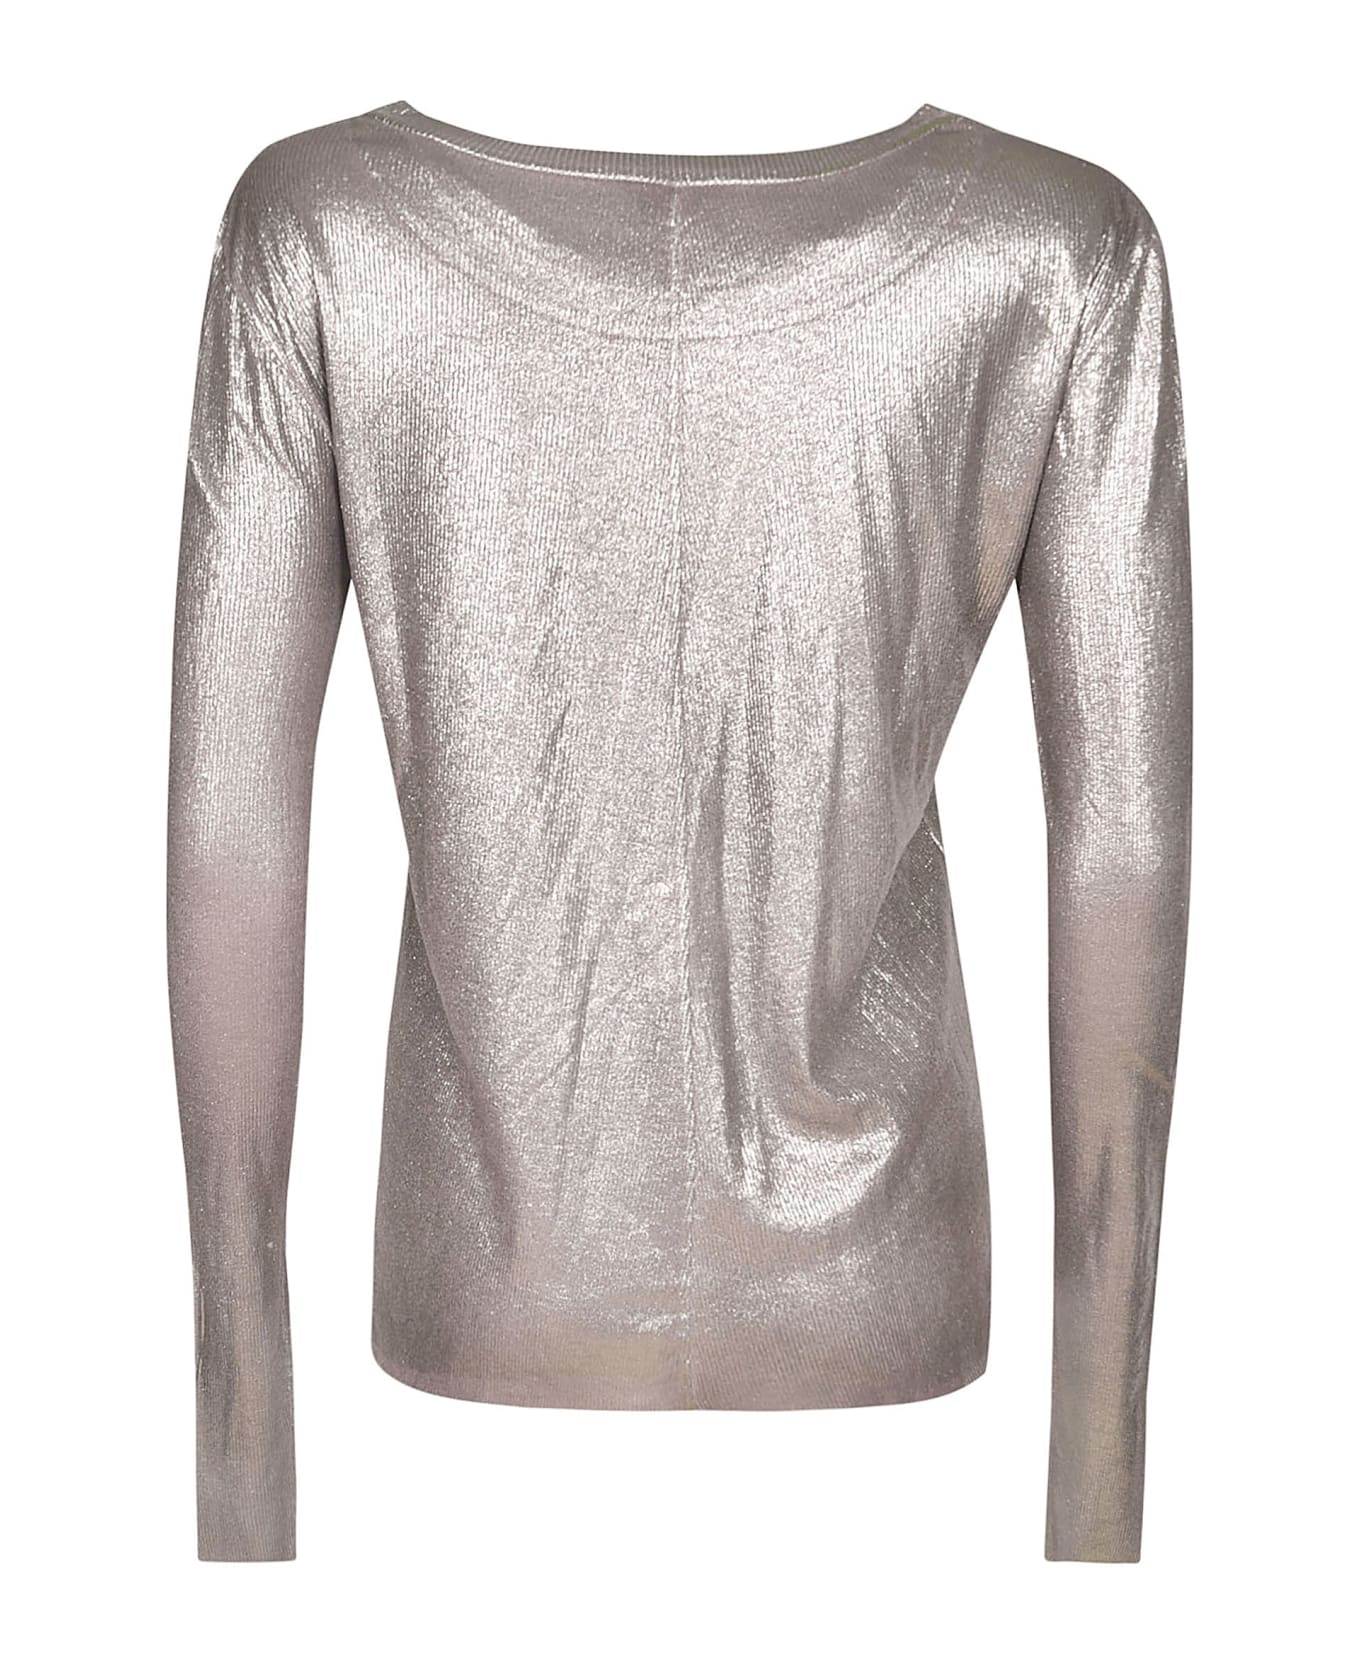 Avant Toi All-over Glitter Embellished Sweater - Purple